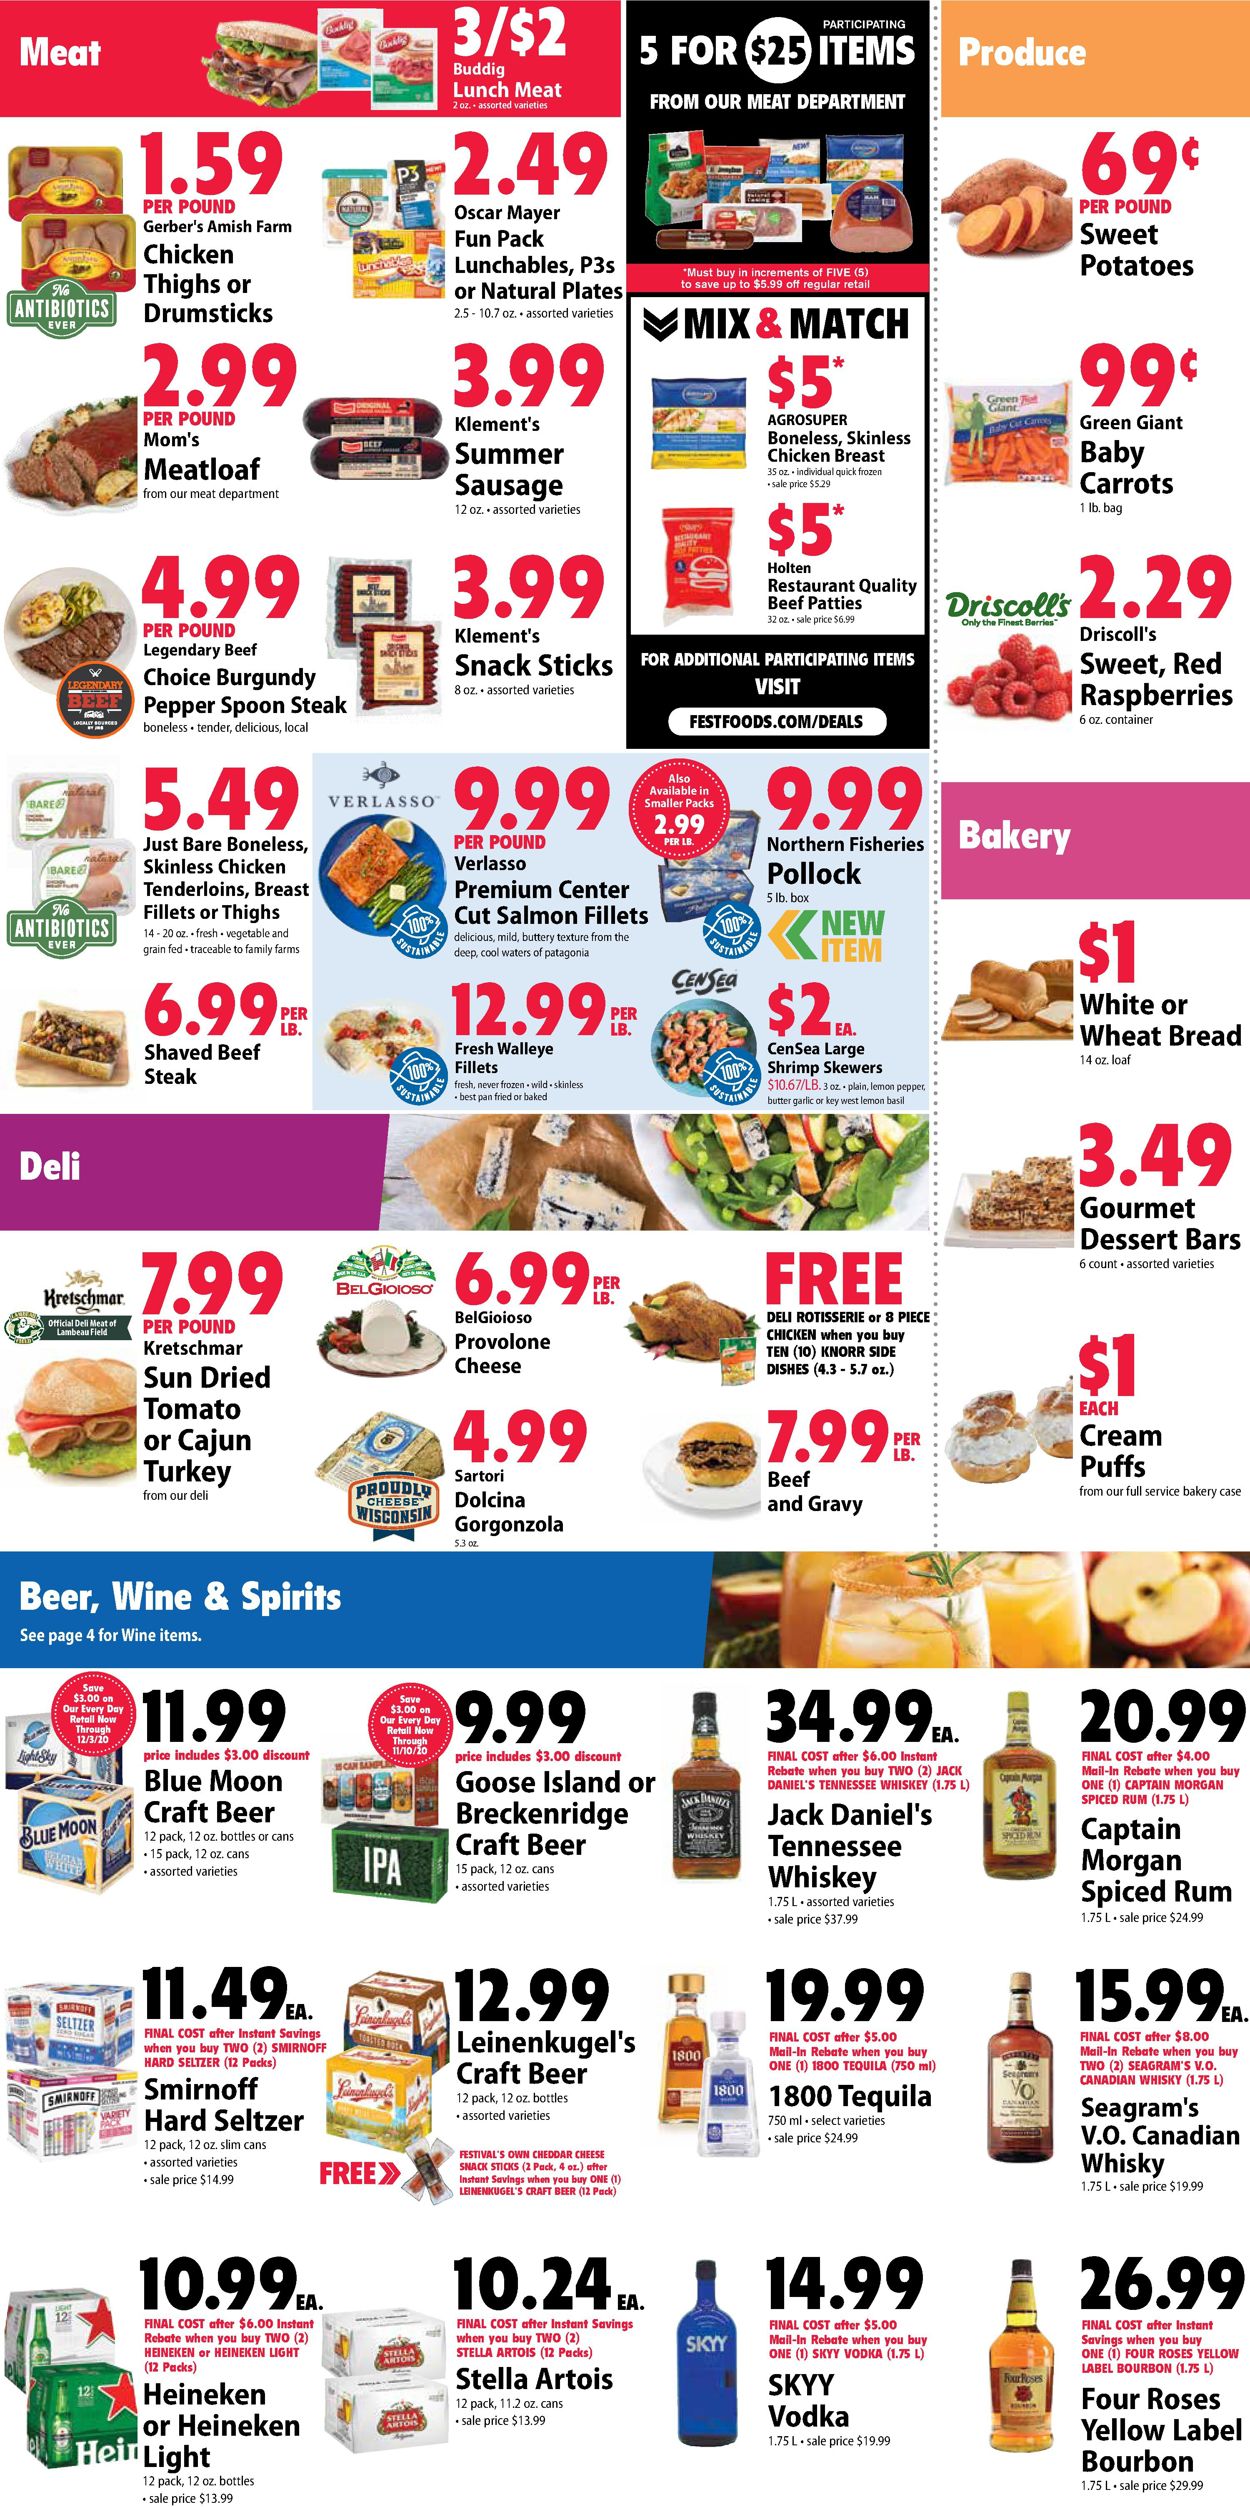 Festival Foods Current weekly ad 10/28 11/10/2020 [5]